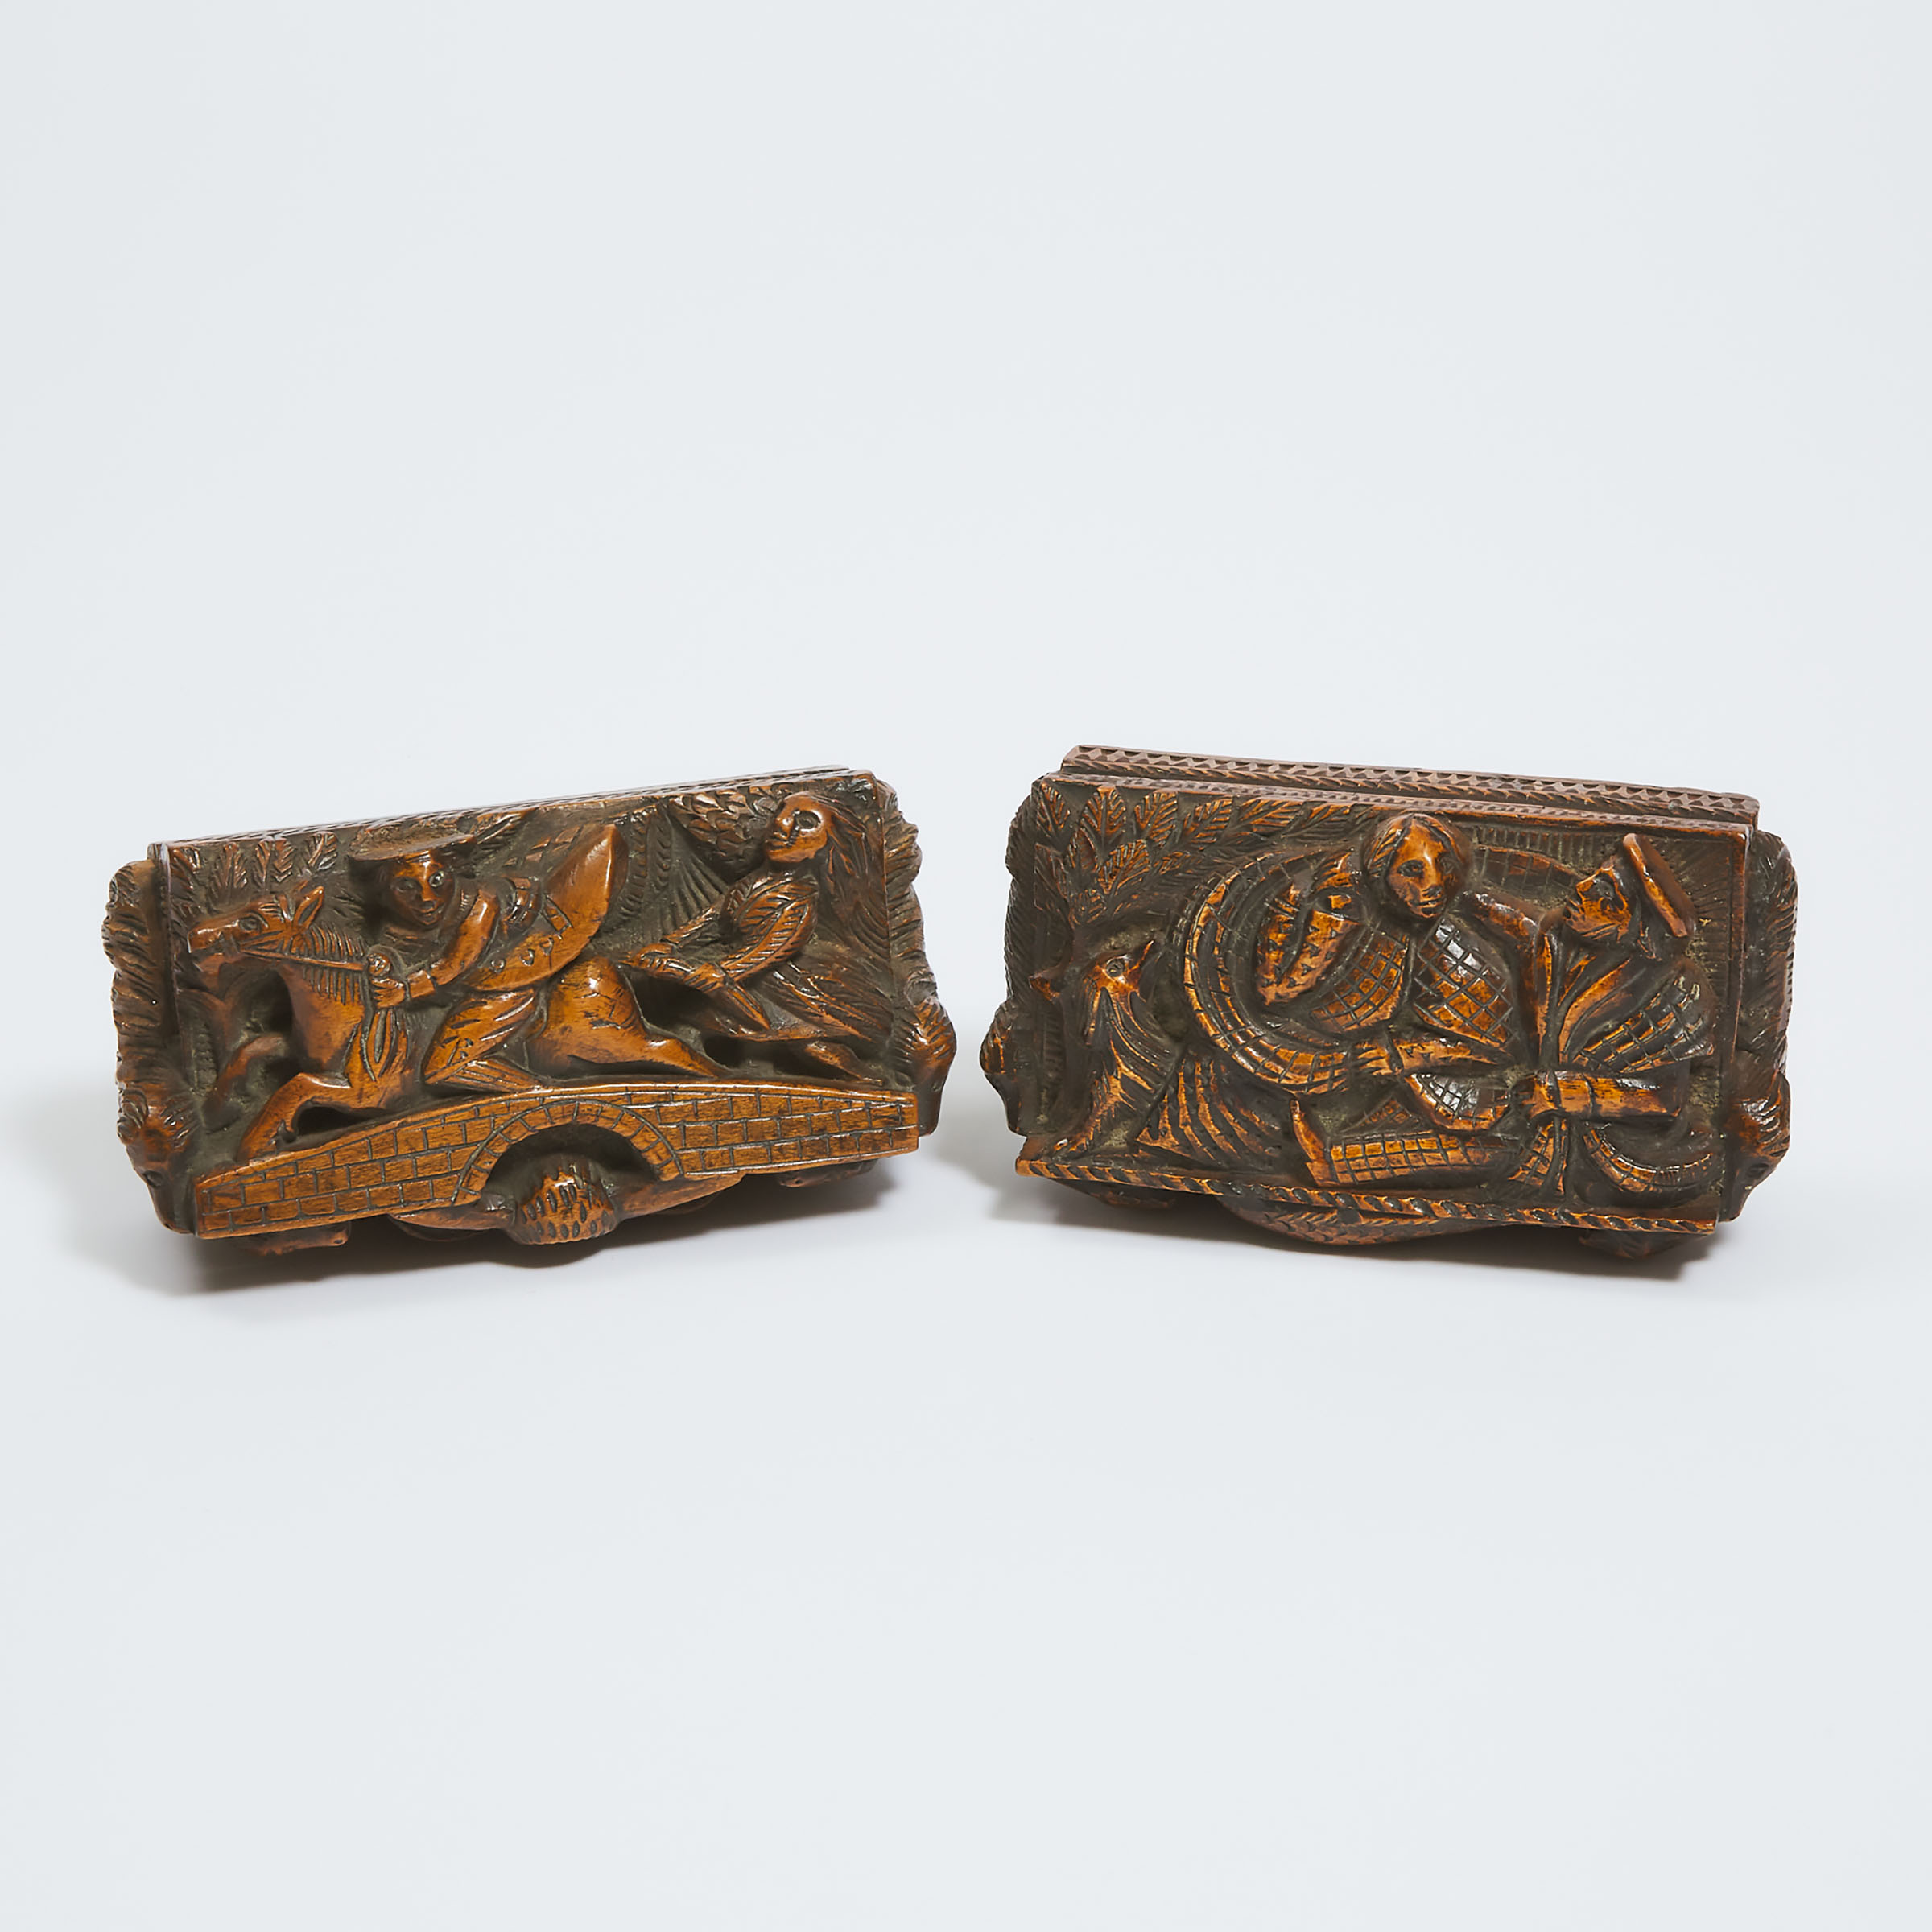 Two Scottish Carved Sycamore Robbie Burns 'Blind Man' Table Snuff Boxes, mid 19th century